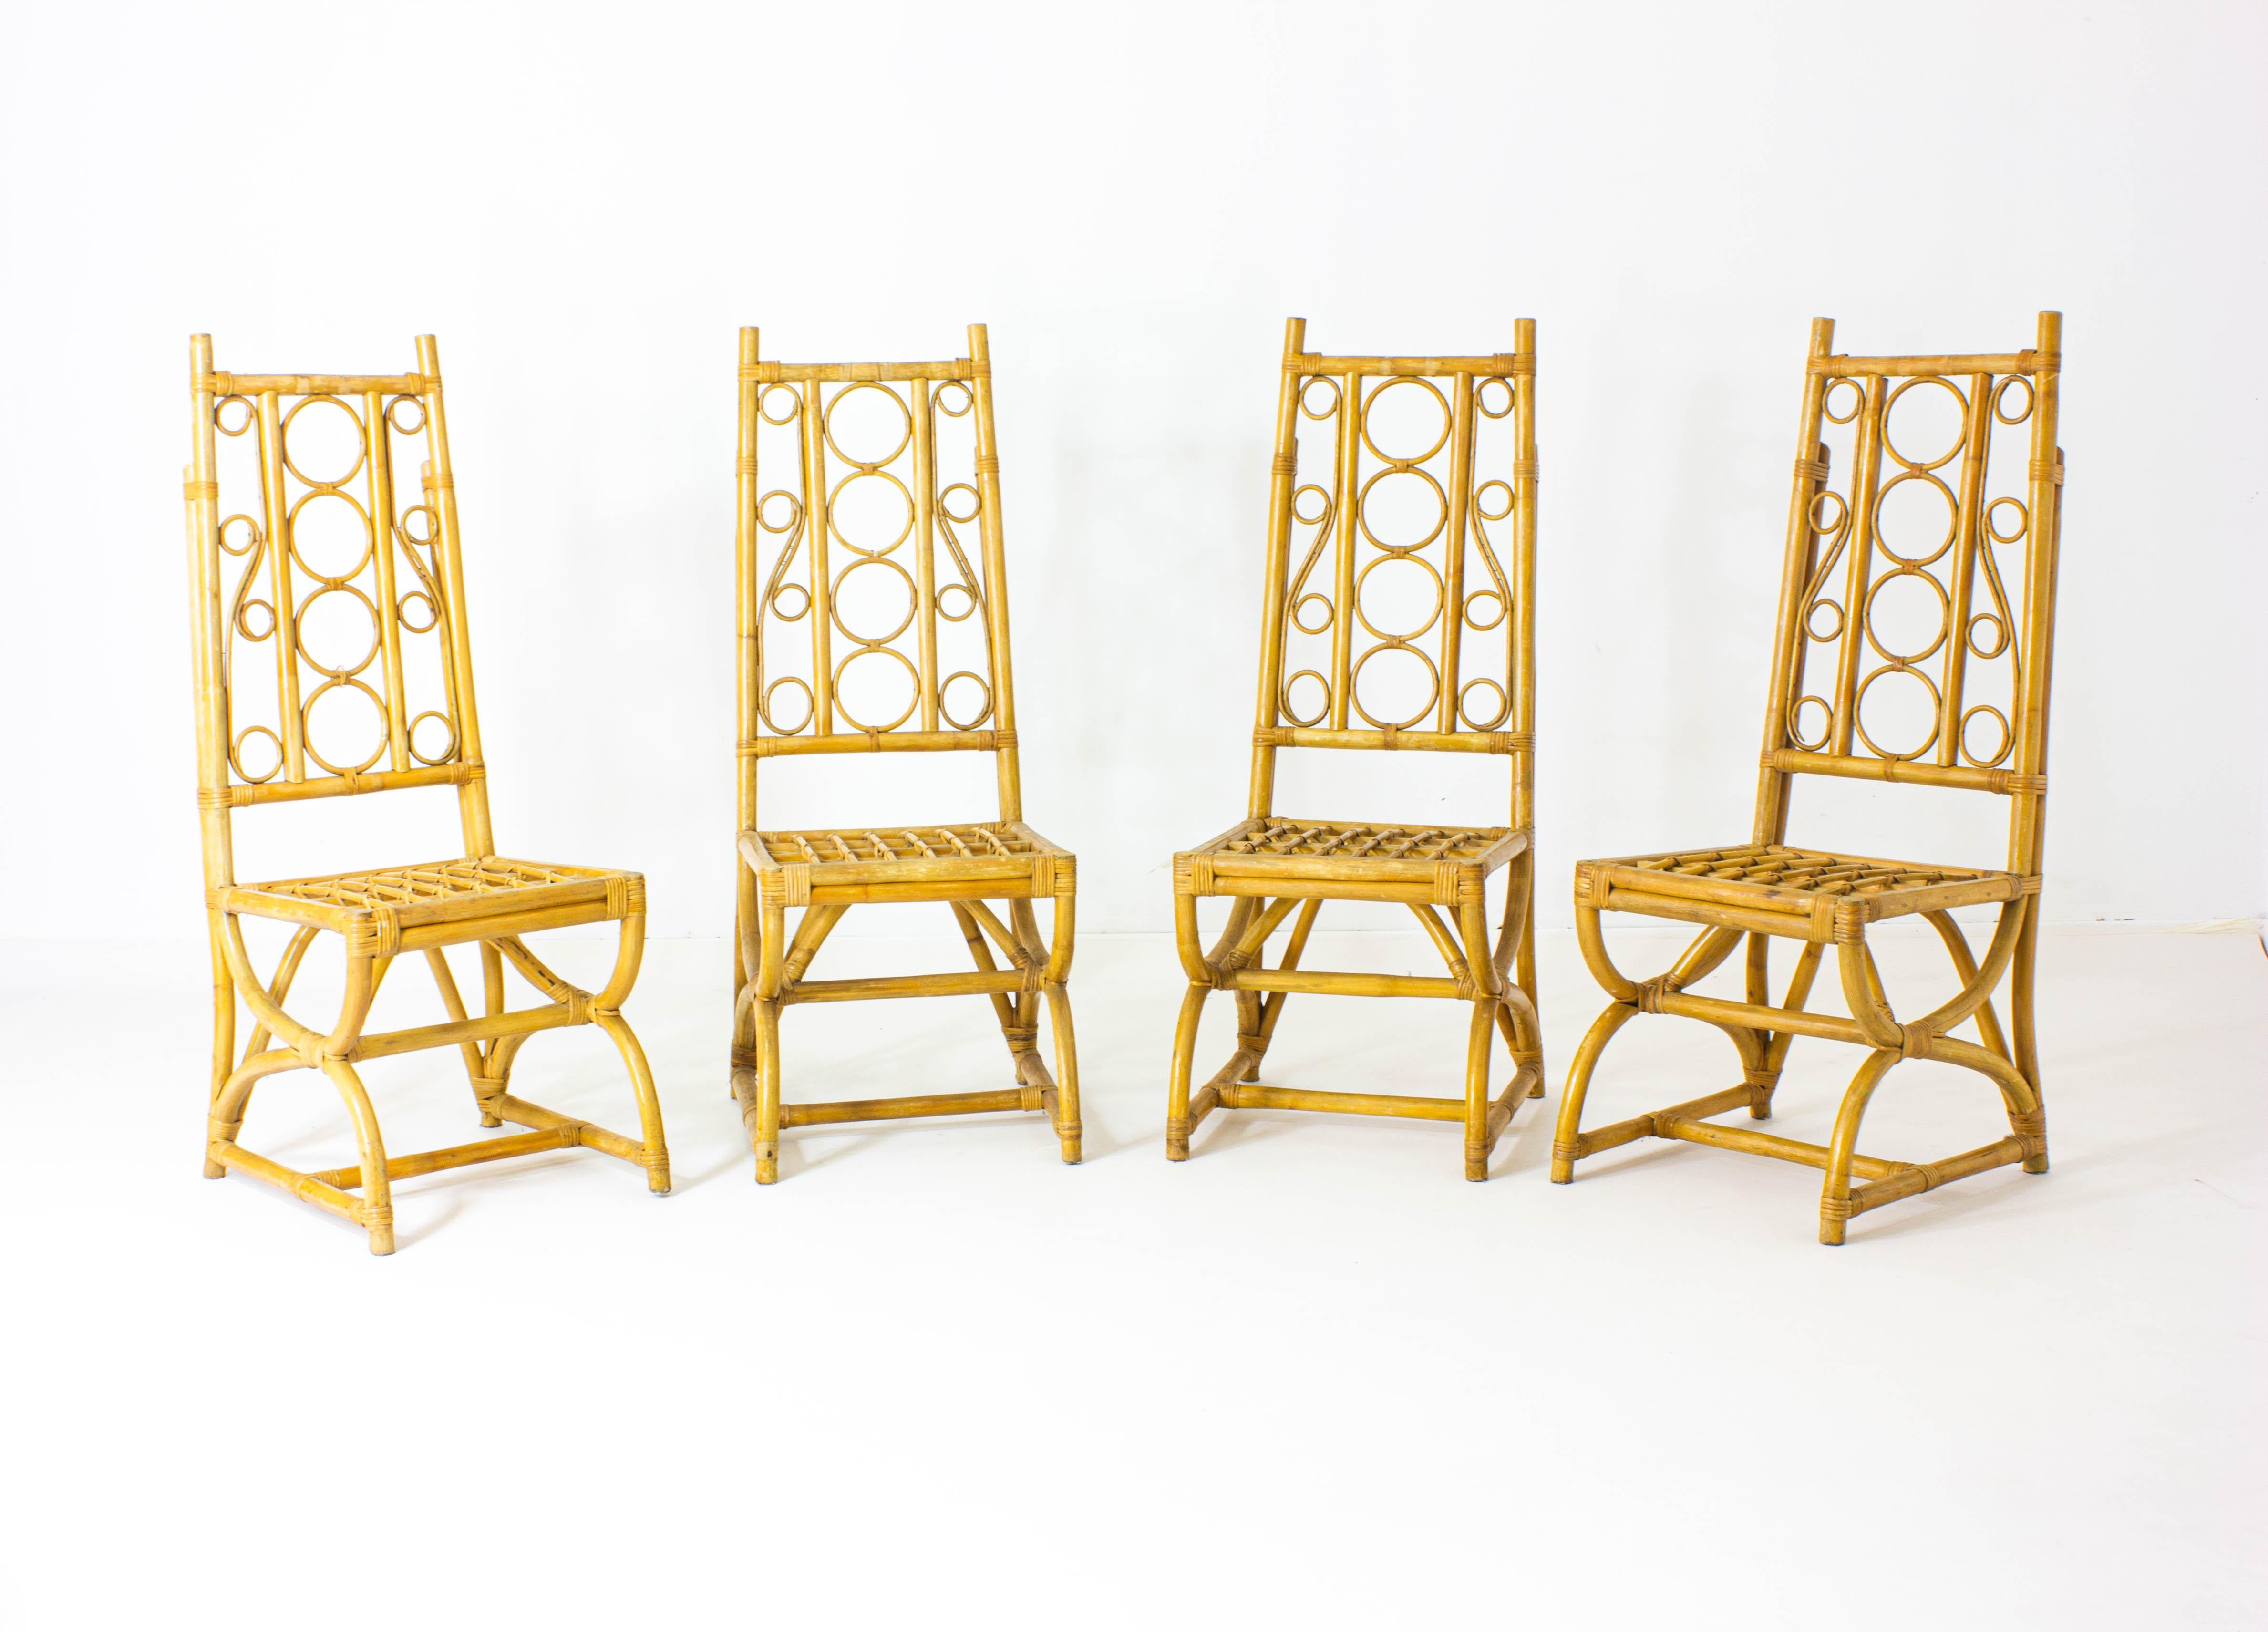 Rare set of tropical bamboo and rattan dining chairs. Evoke the feeling of lounging in Miami in the 80s. What’s missing is a mojito, a sunset, and an ocean view.